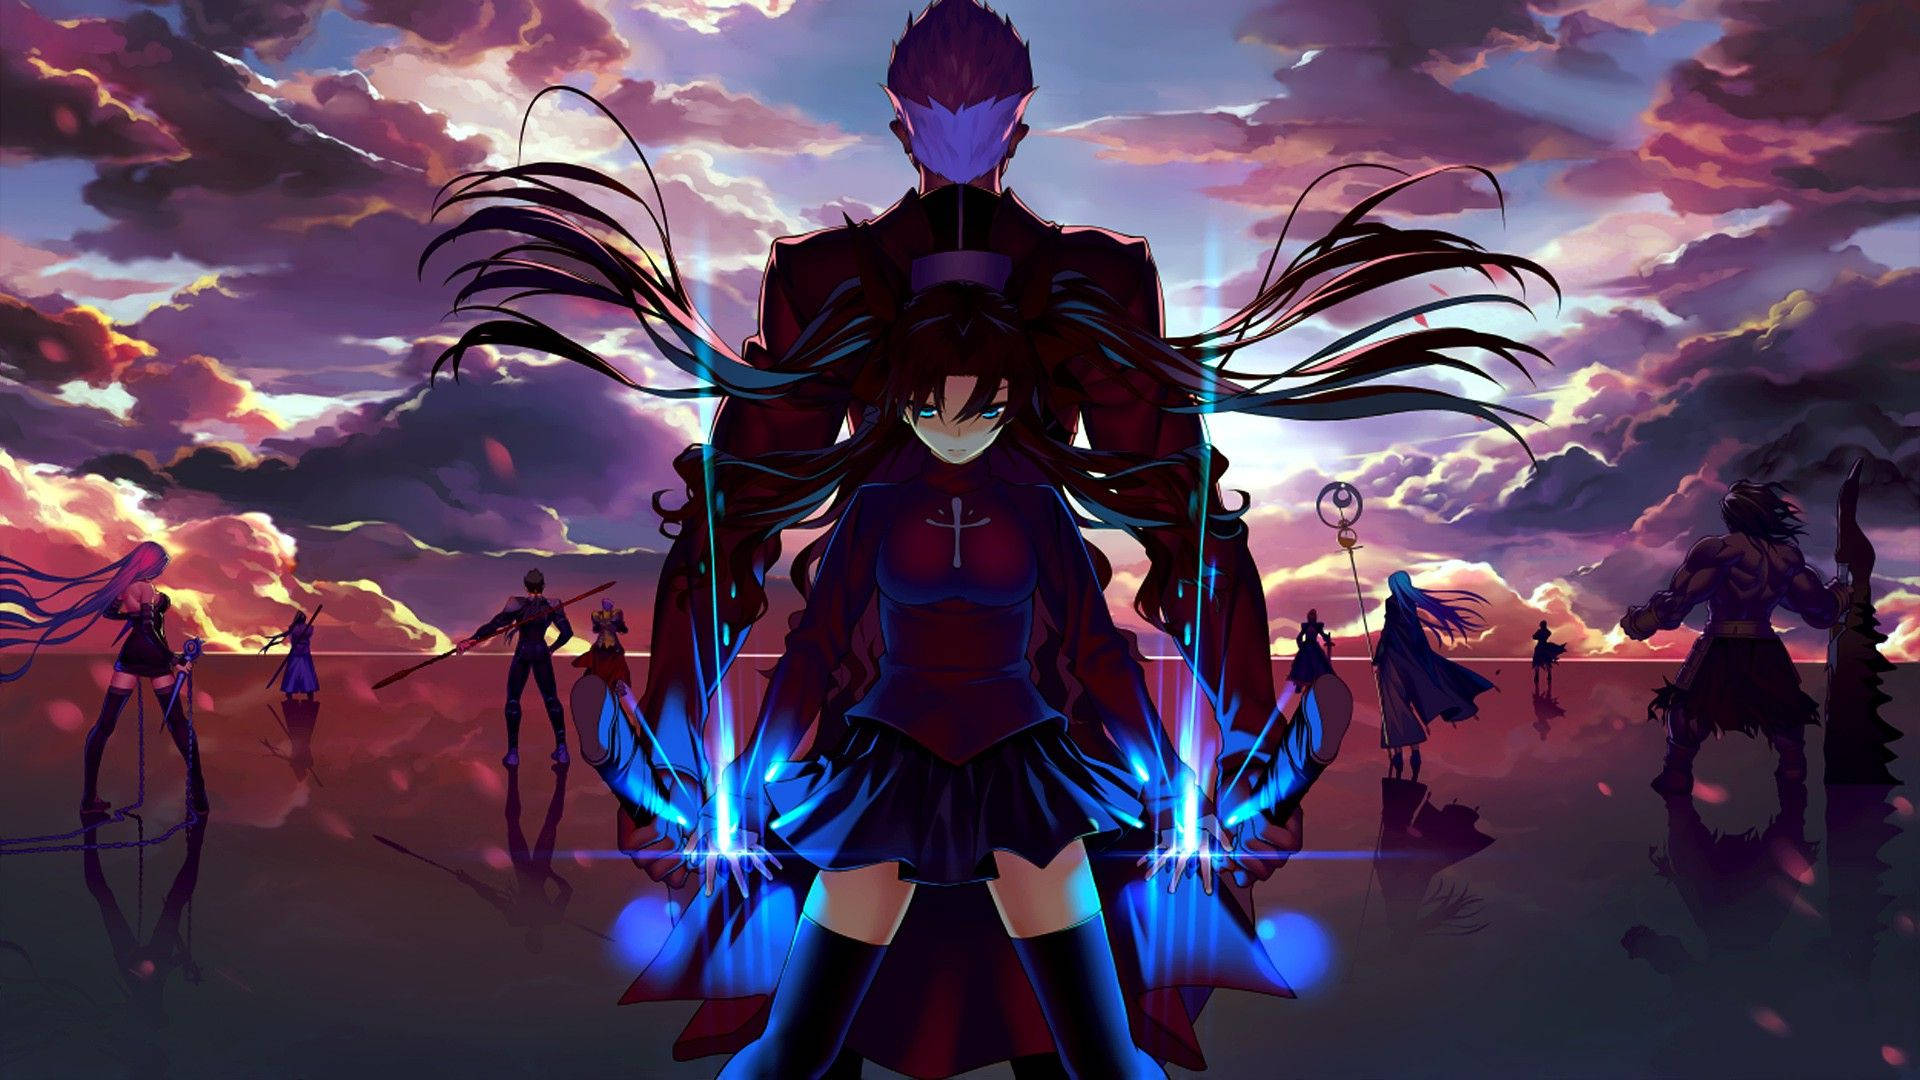 dan hotaling recommends Fate Stay Night Rin Wallpaper